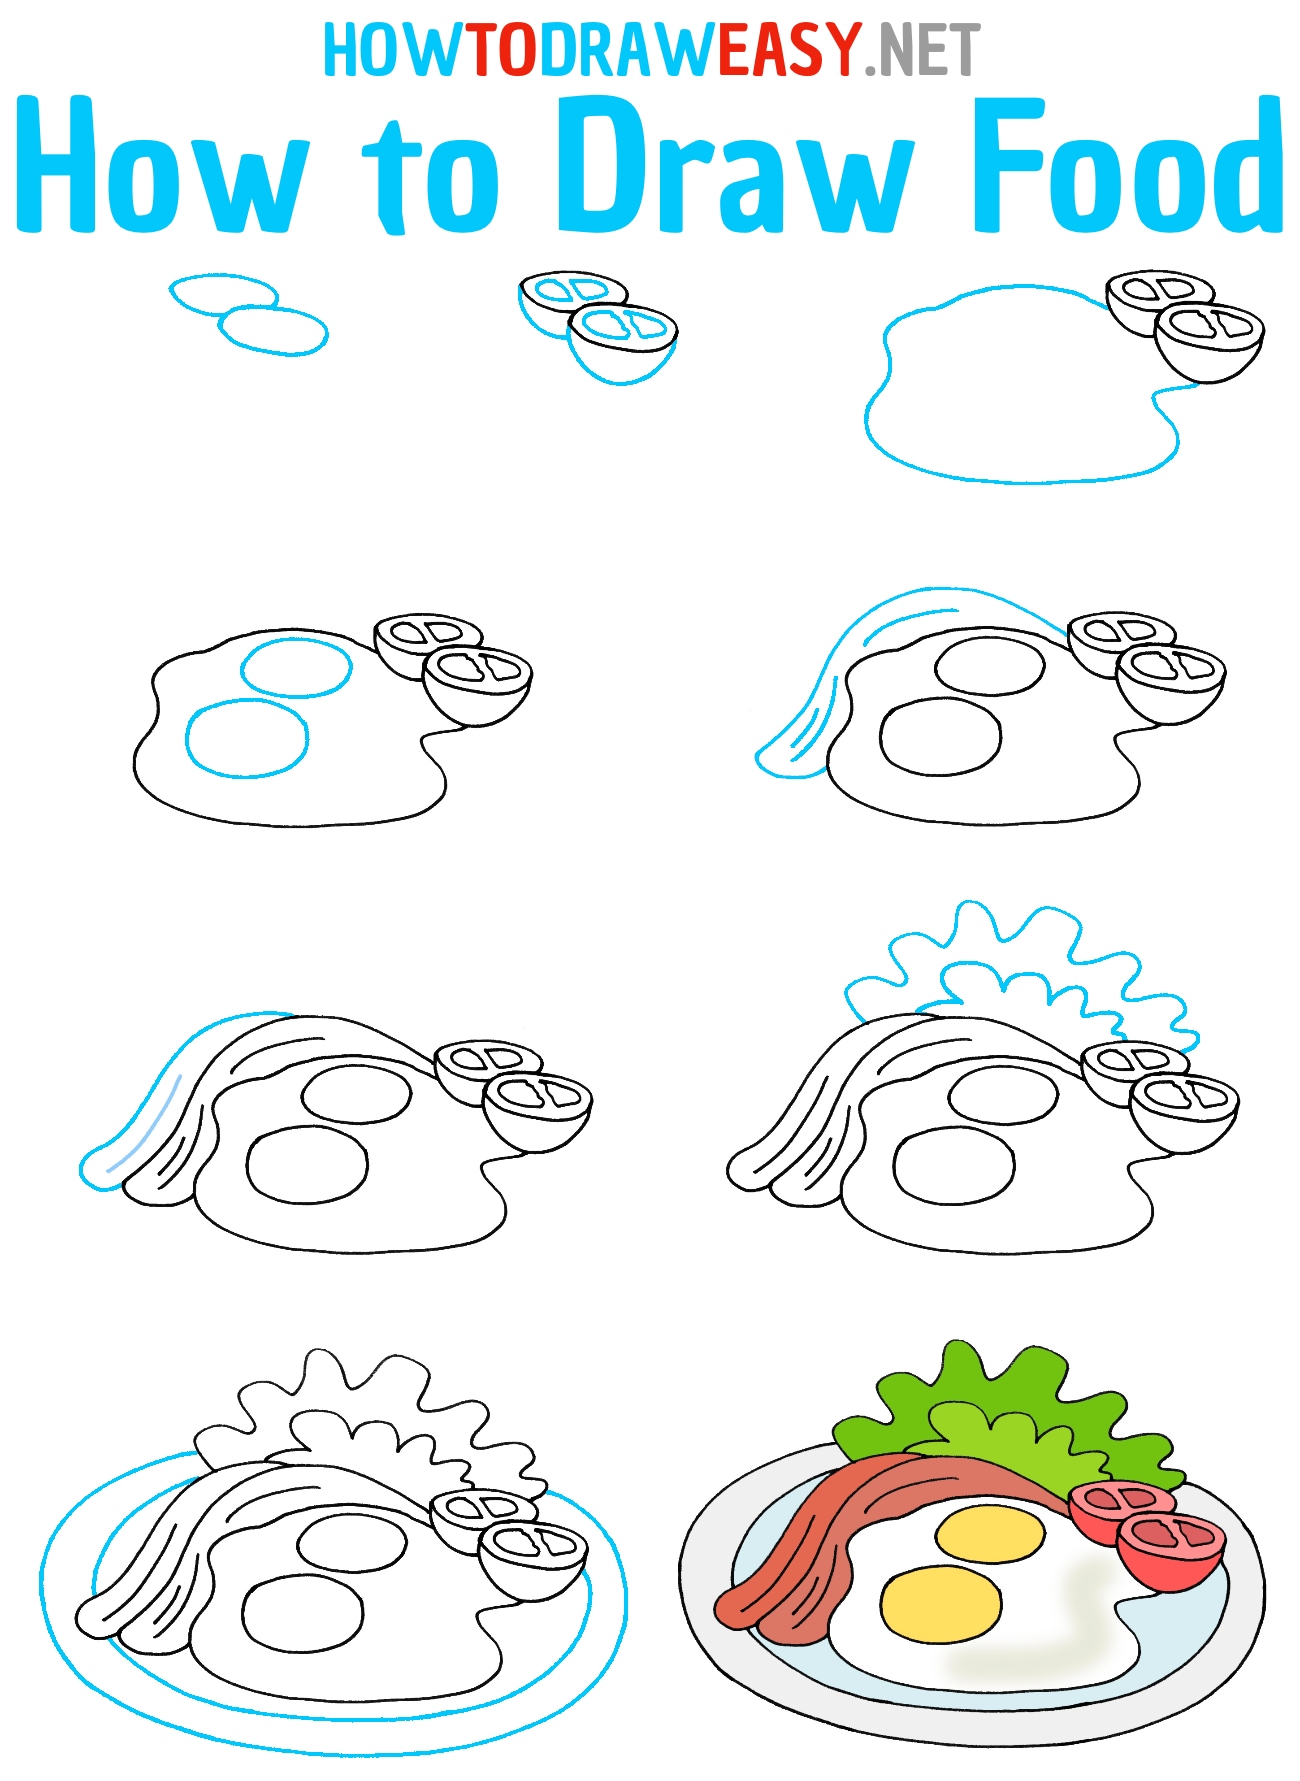 How to Draw Food Step by Step